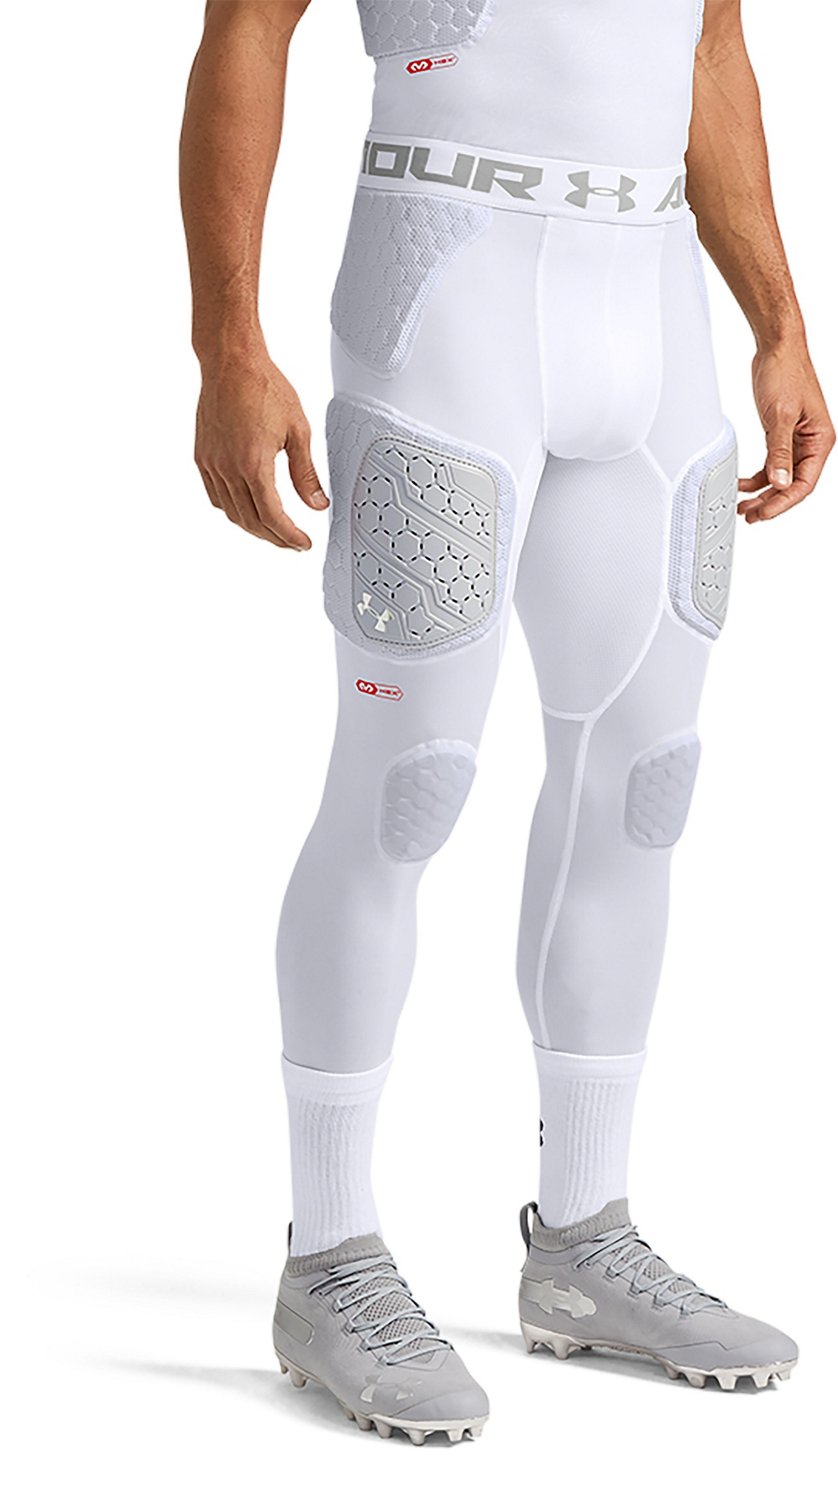 Under Armour Gameday Pro 5-Pad Football Compression Girdle Tights